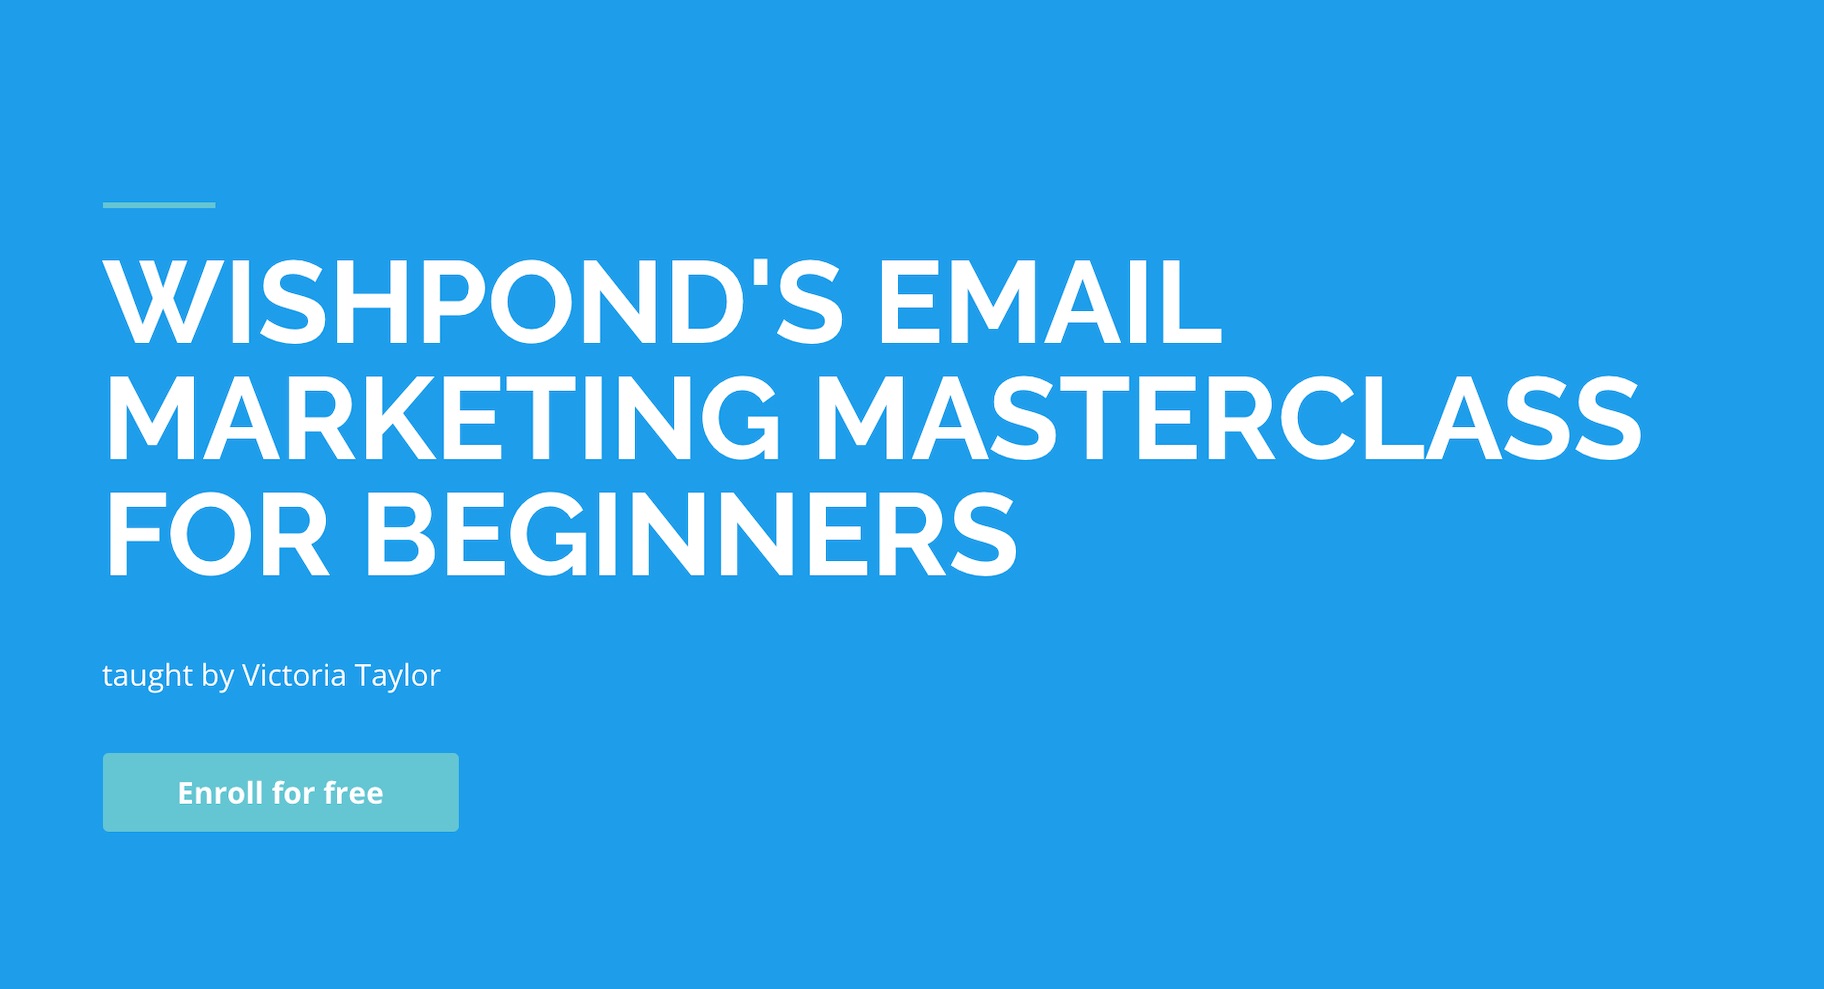 Email Marketing Masterclass for Beginners - Wishpond